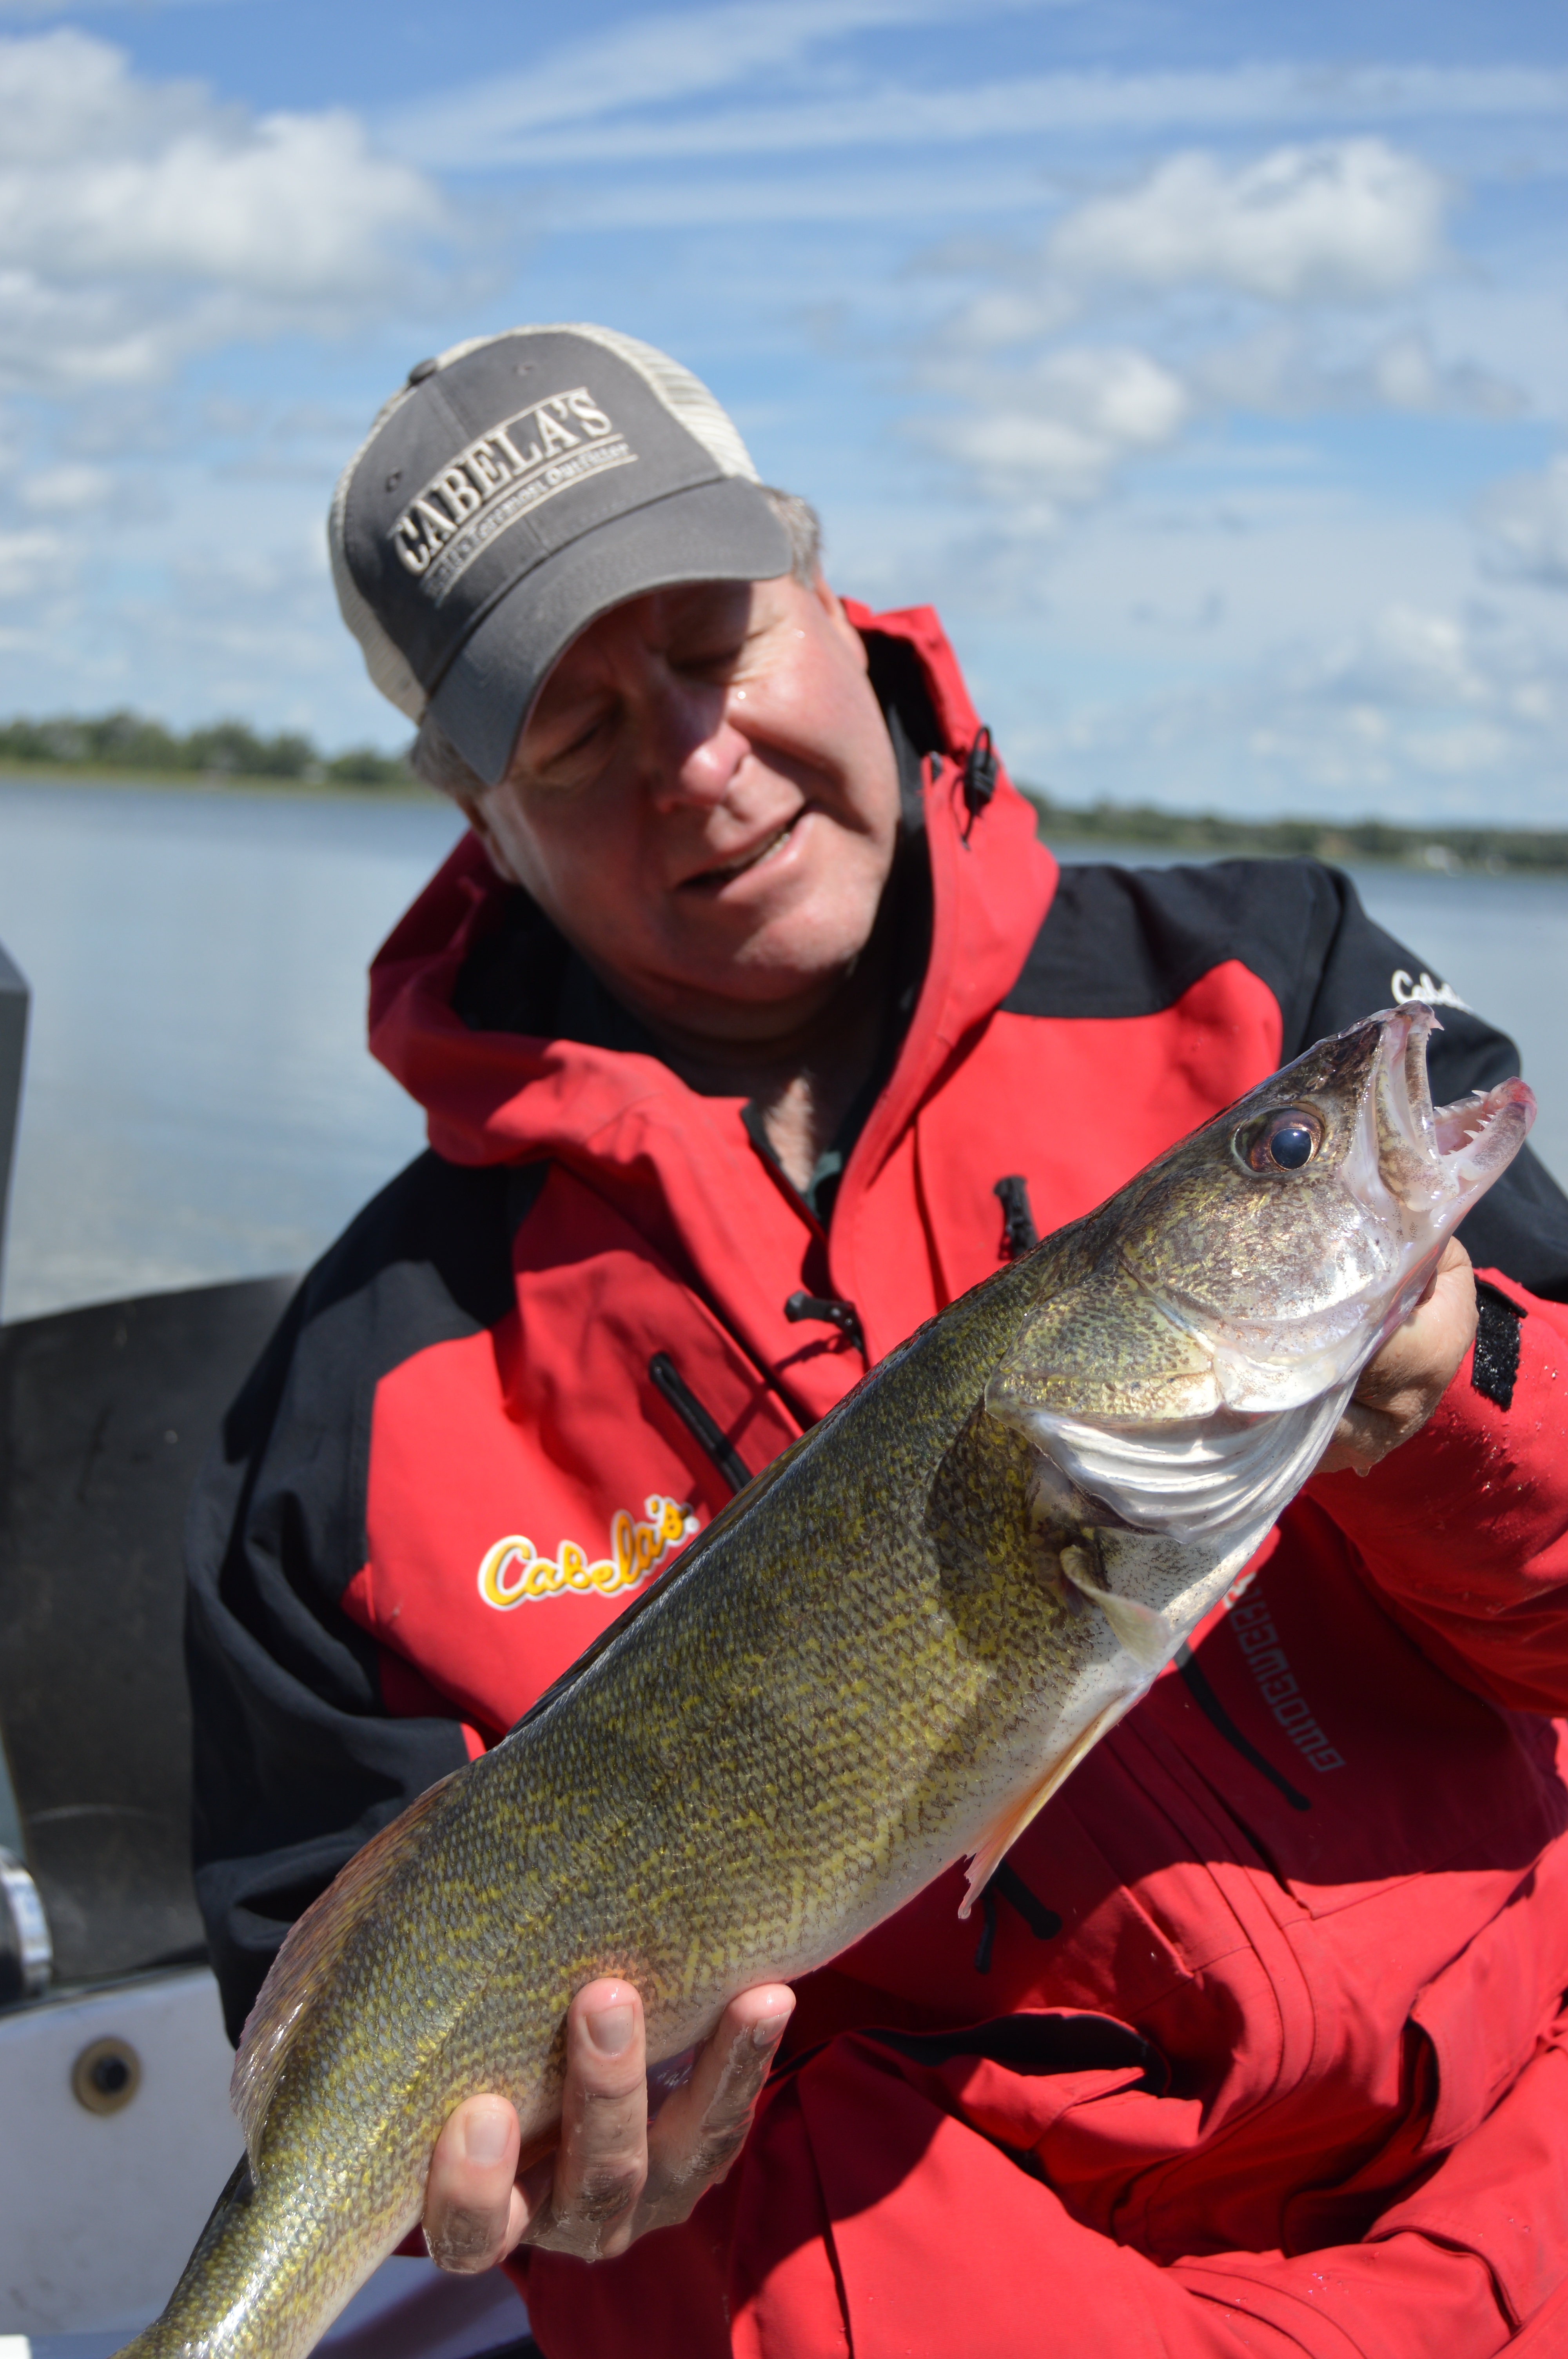 A fisherman holding up a walleye caught on a jig.